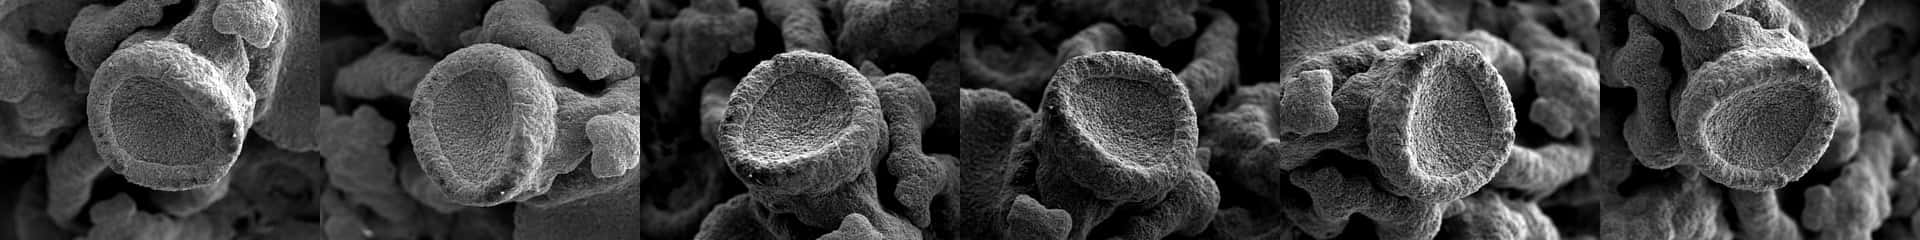 scanning electron microscope images of lichen from several angles